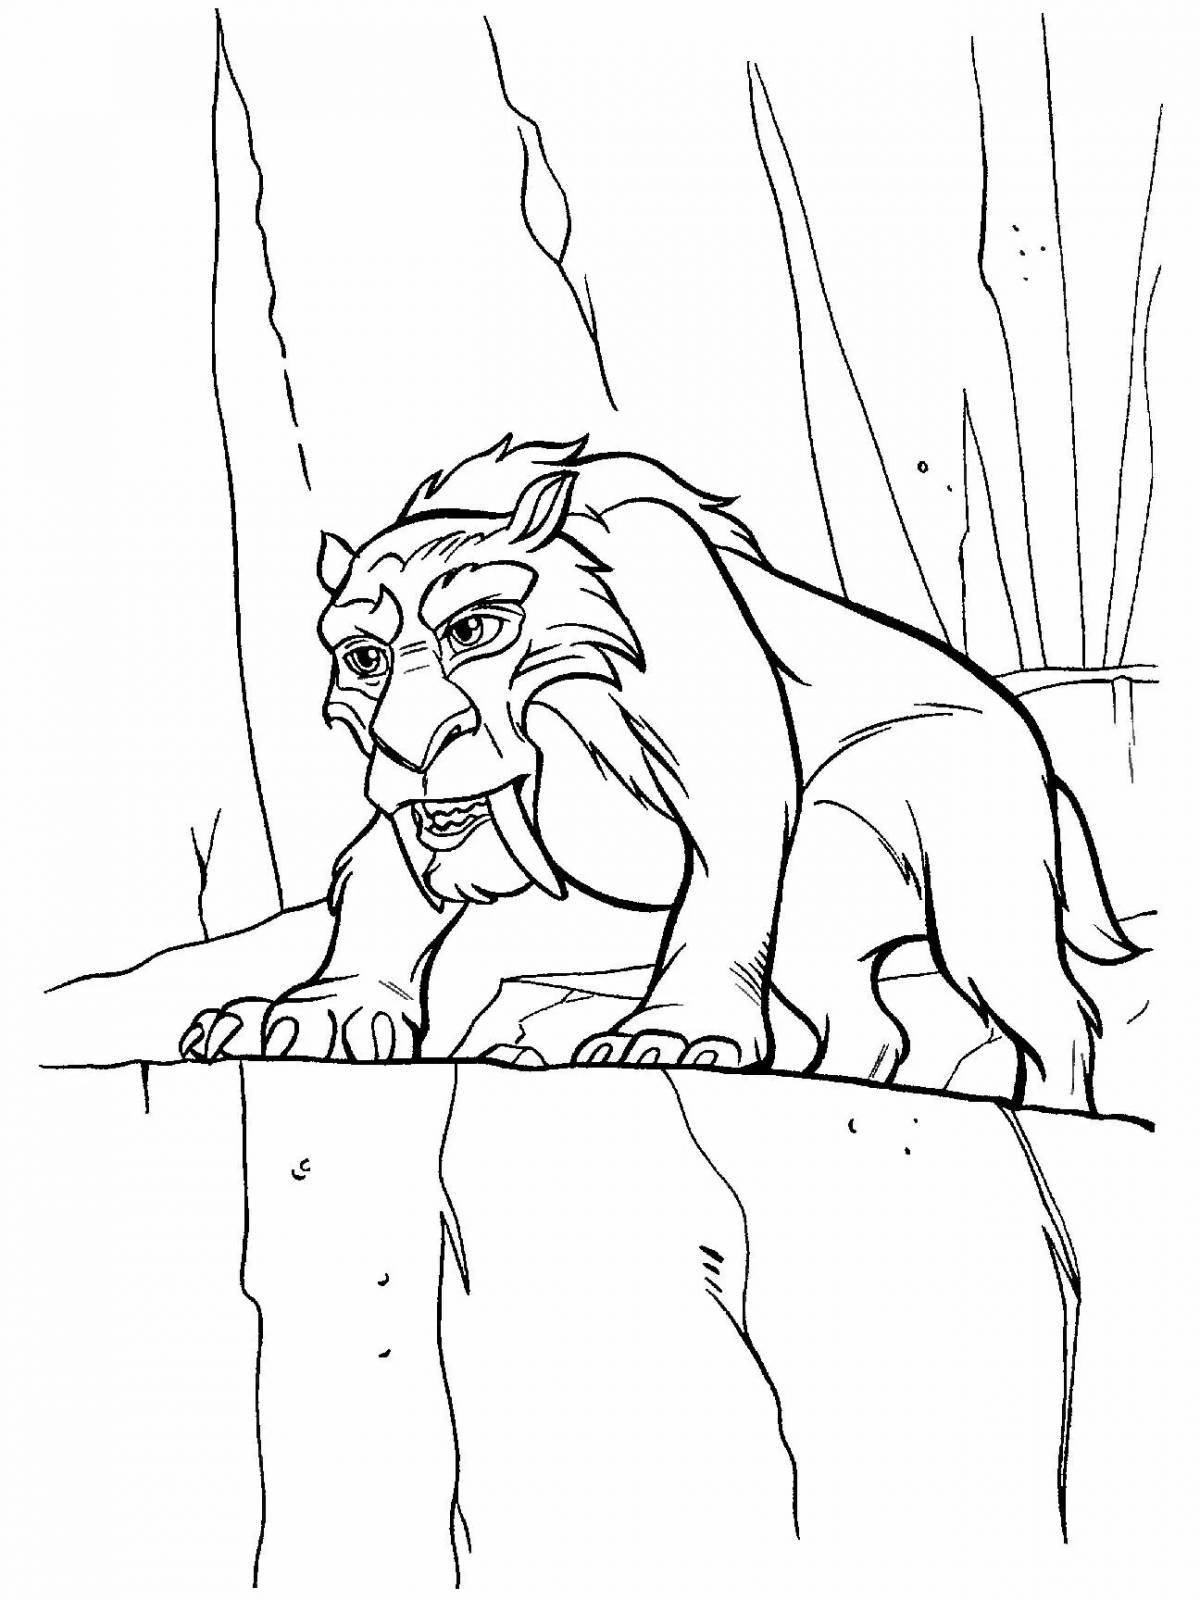 Shira's wonderful ice age coloring page